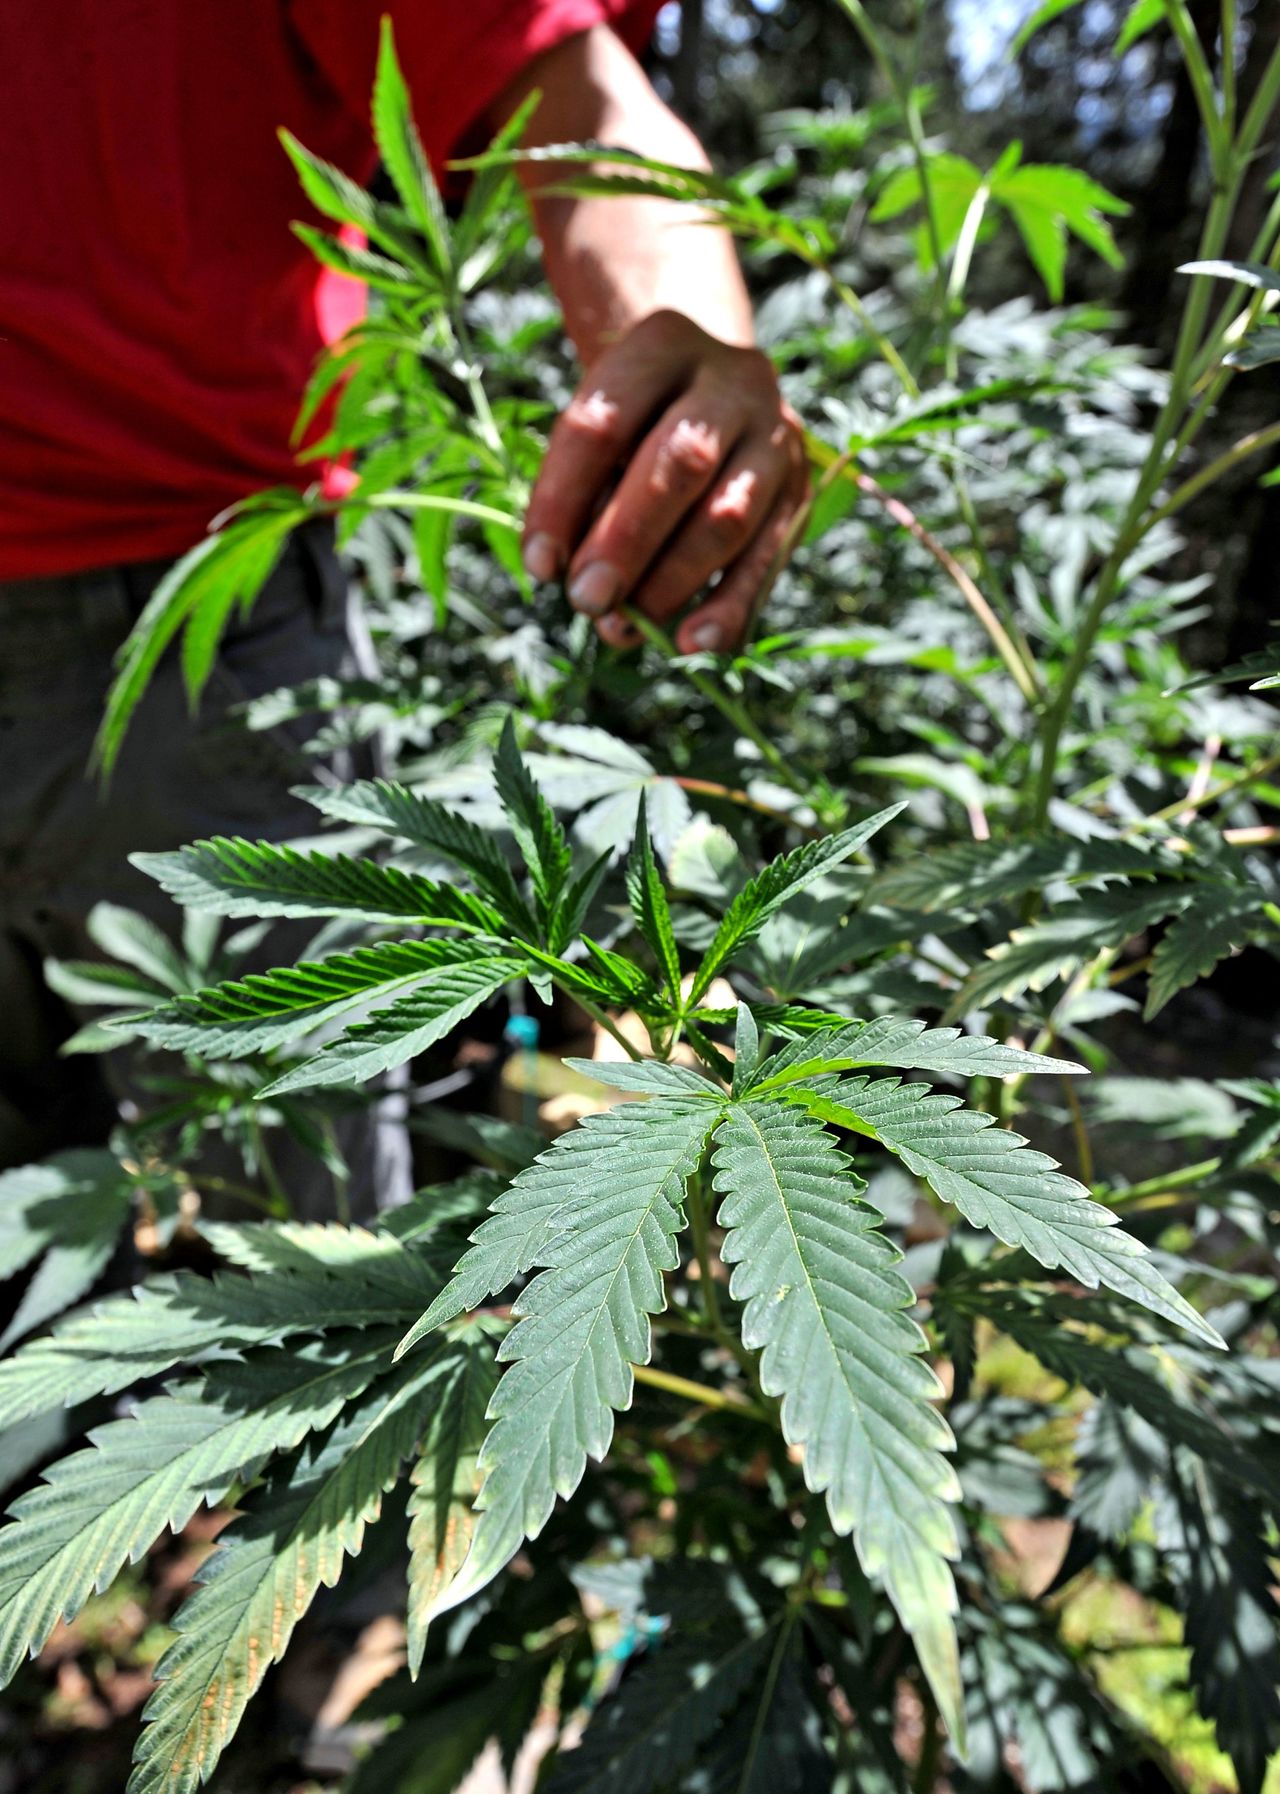 Marijuana plants are grown at a home near the Green Springs, Oregon.